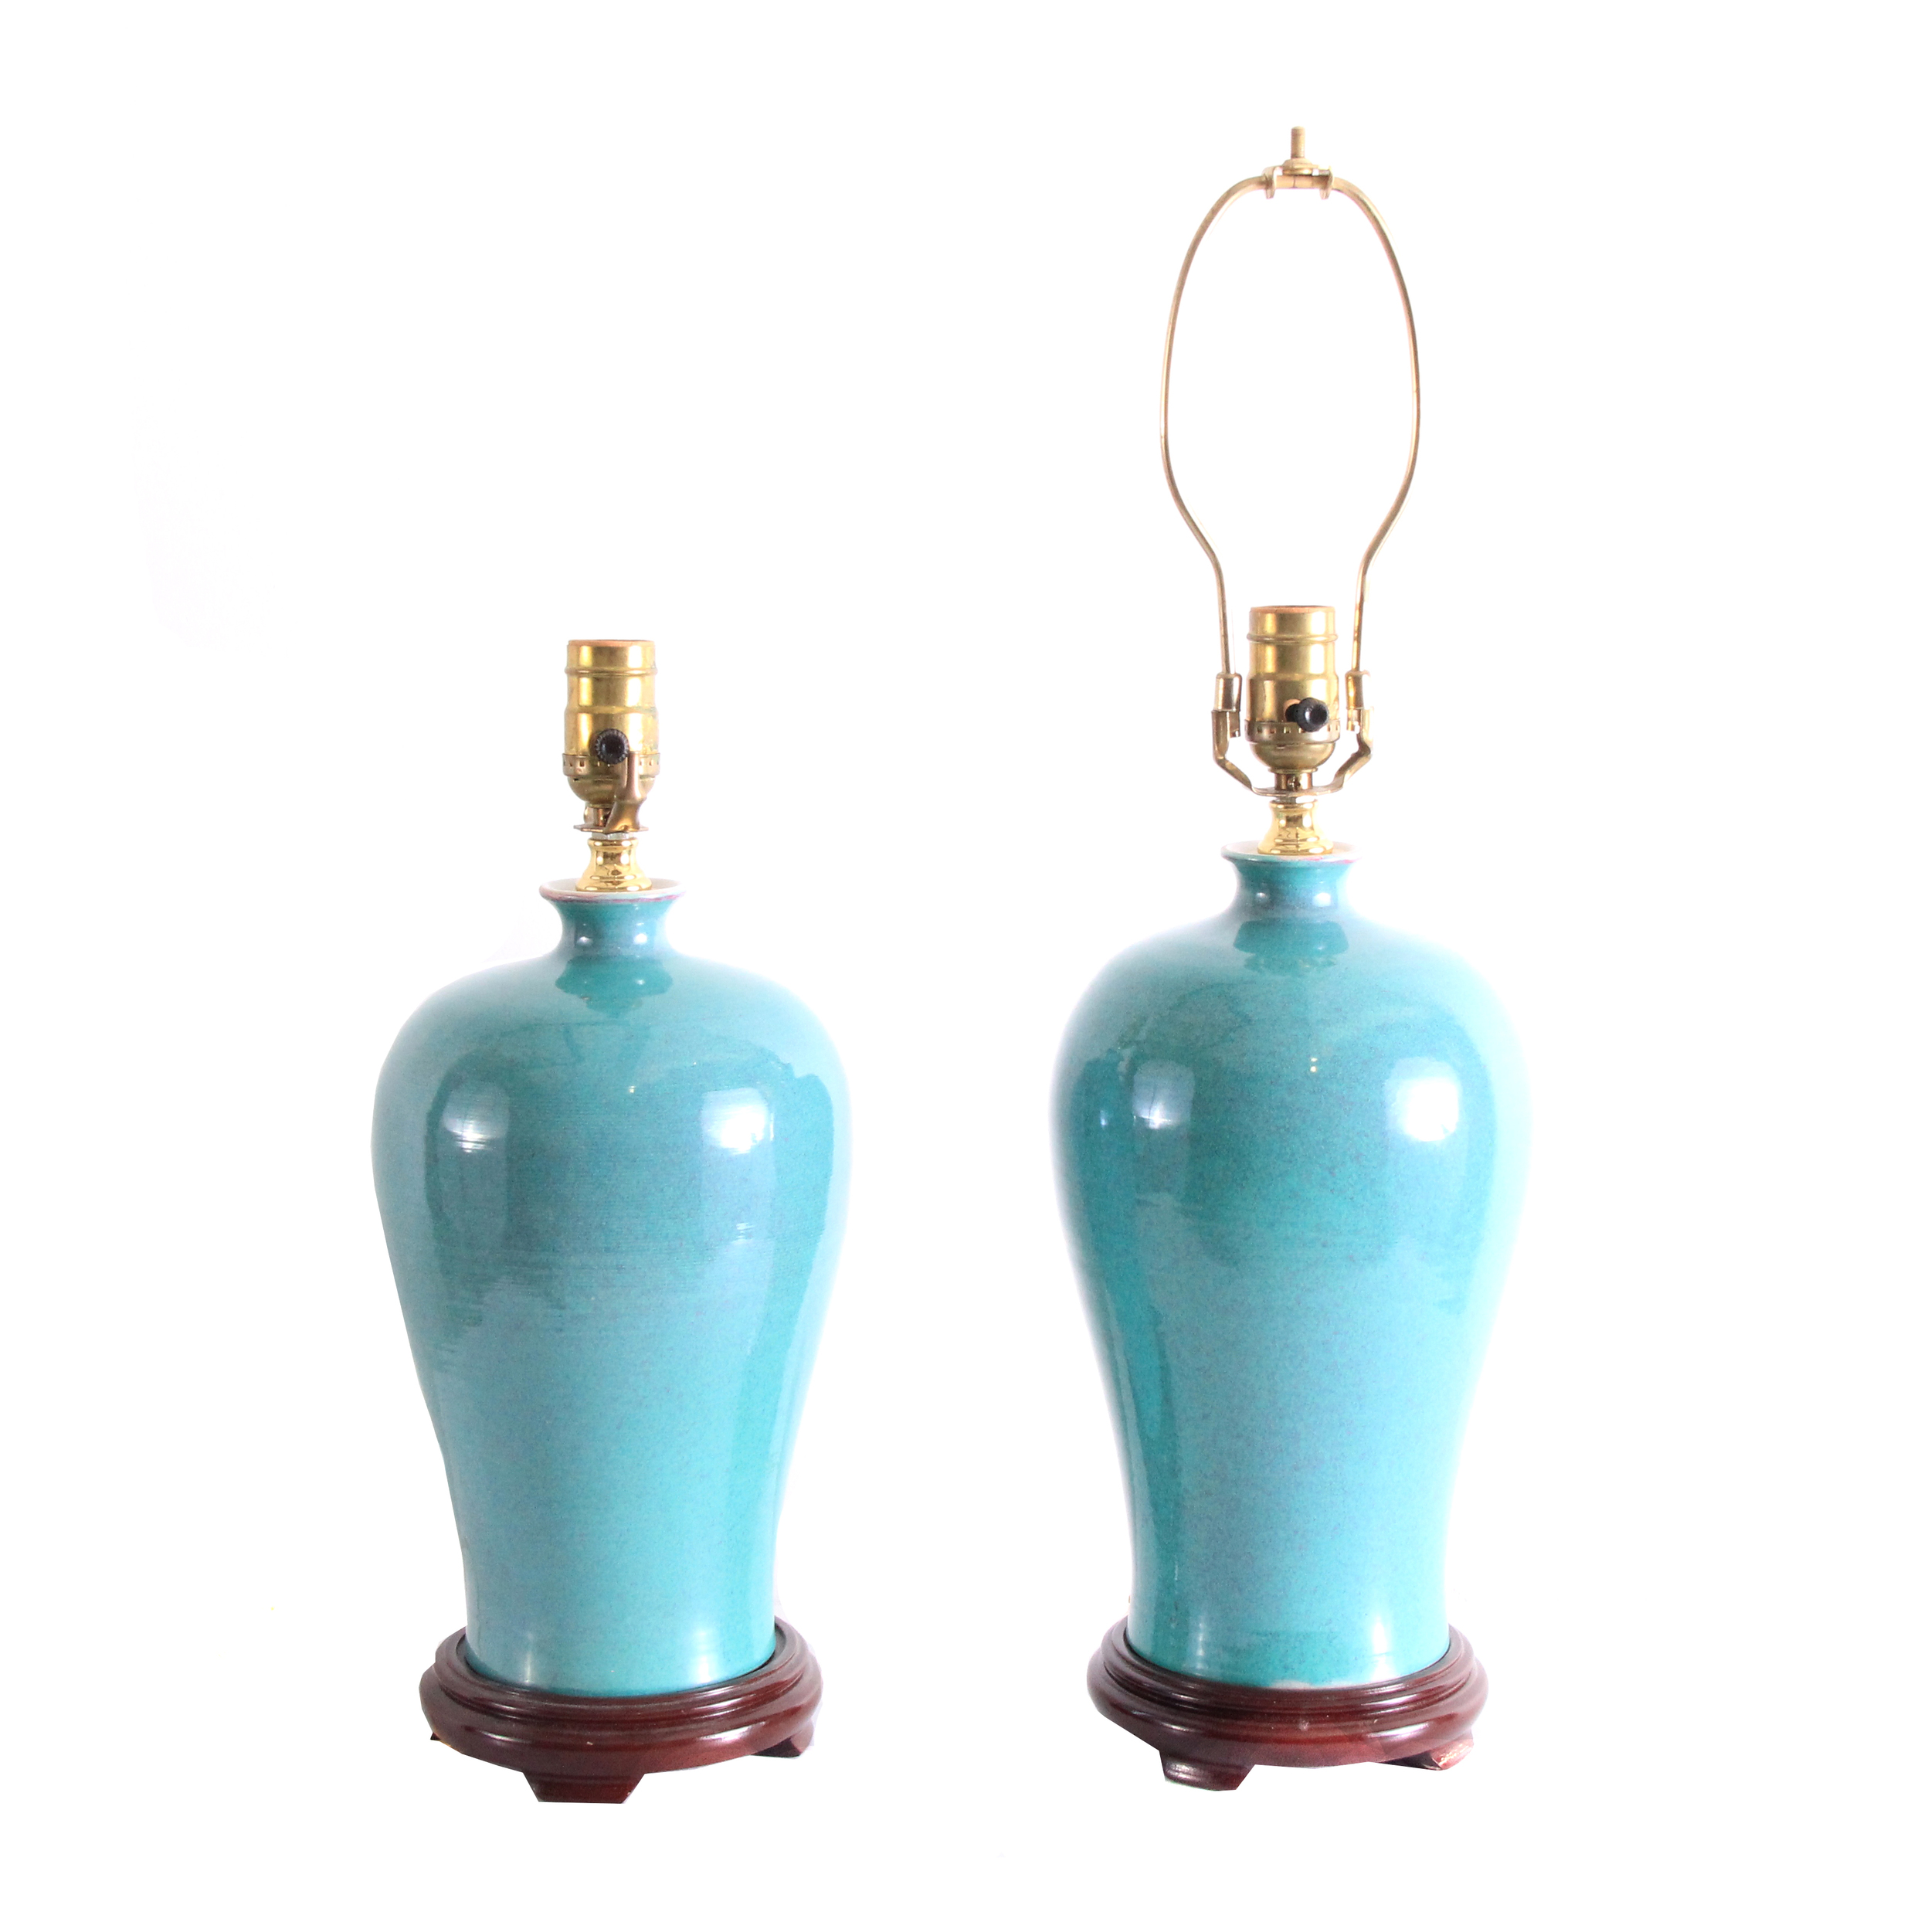 Pair of Vintage Turquoise Lamps